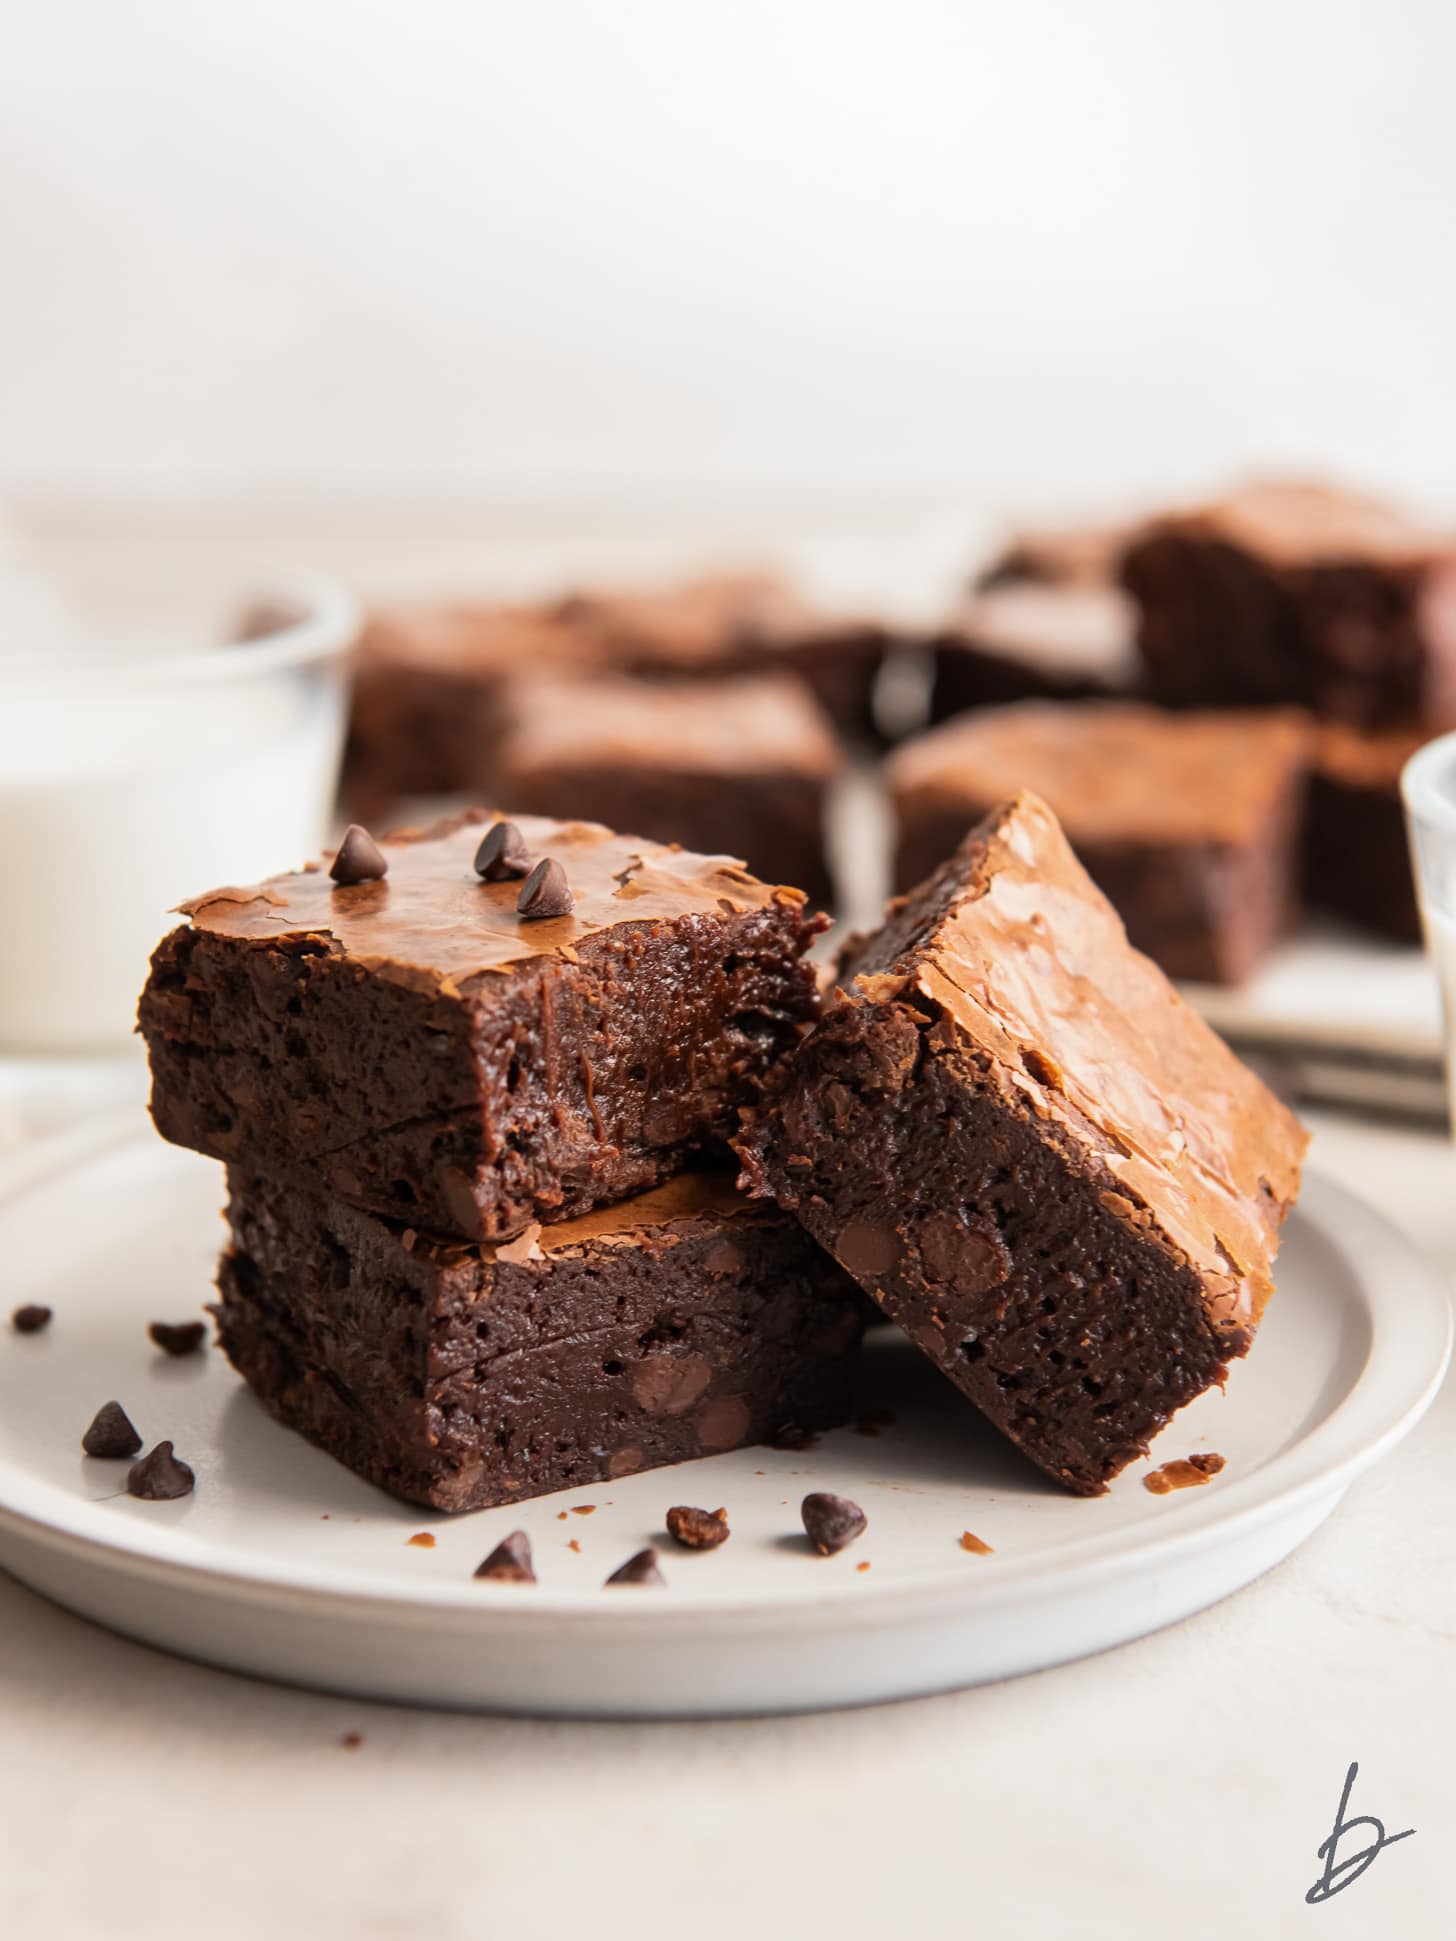 three fudgy brownies on a plate with chocolate chips.